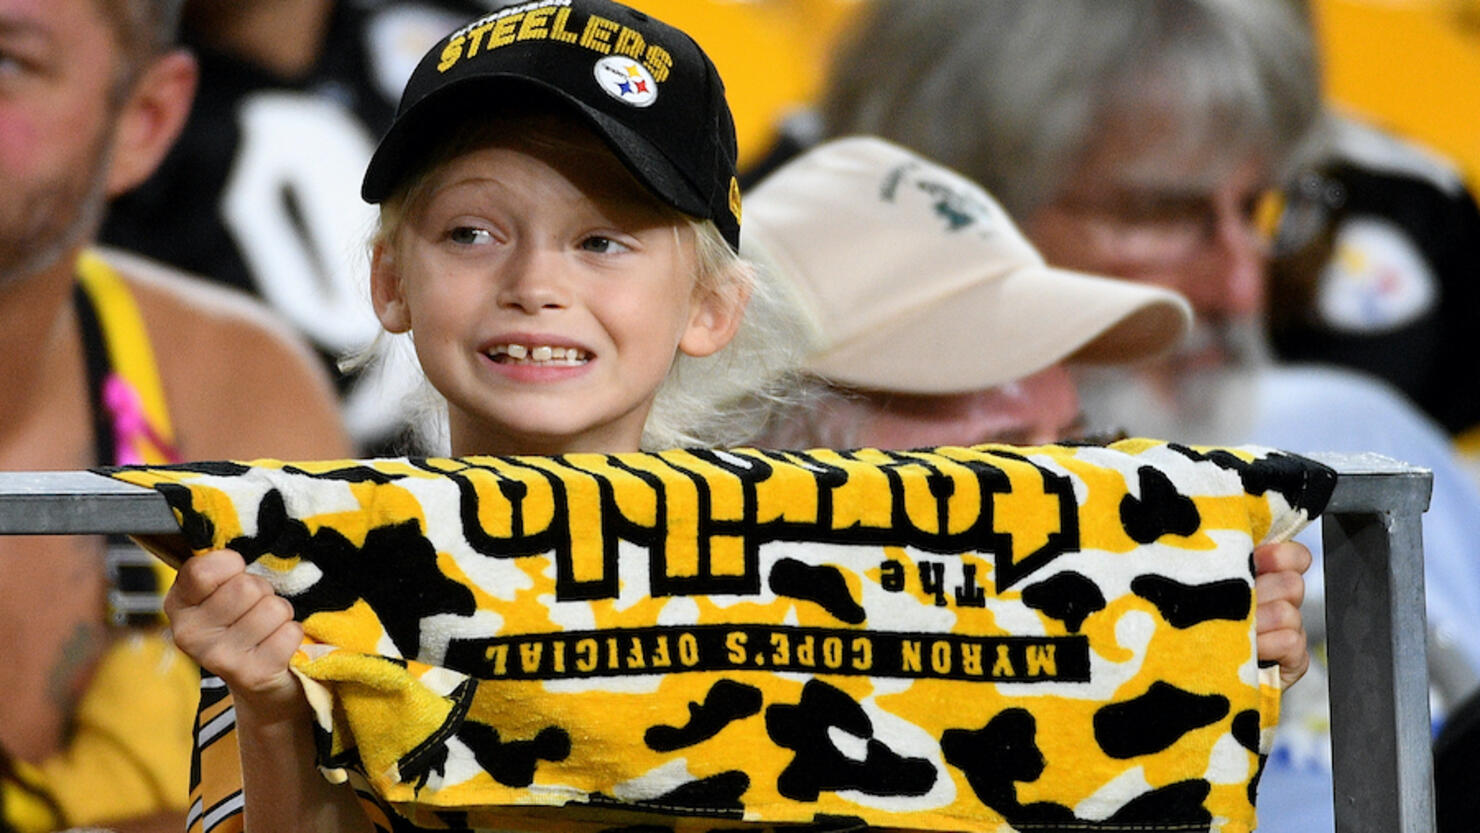 The face of disappointment: A young Steelers fan